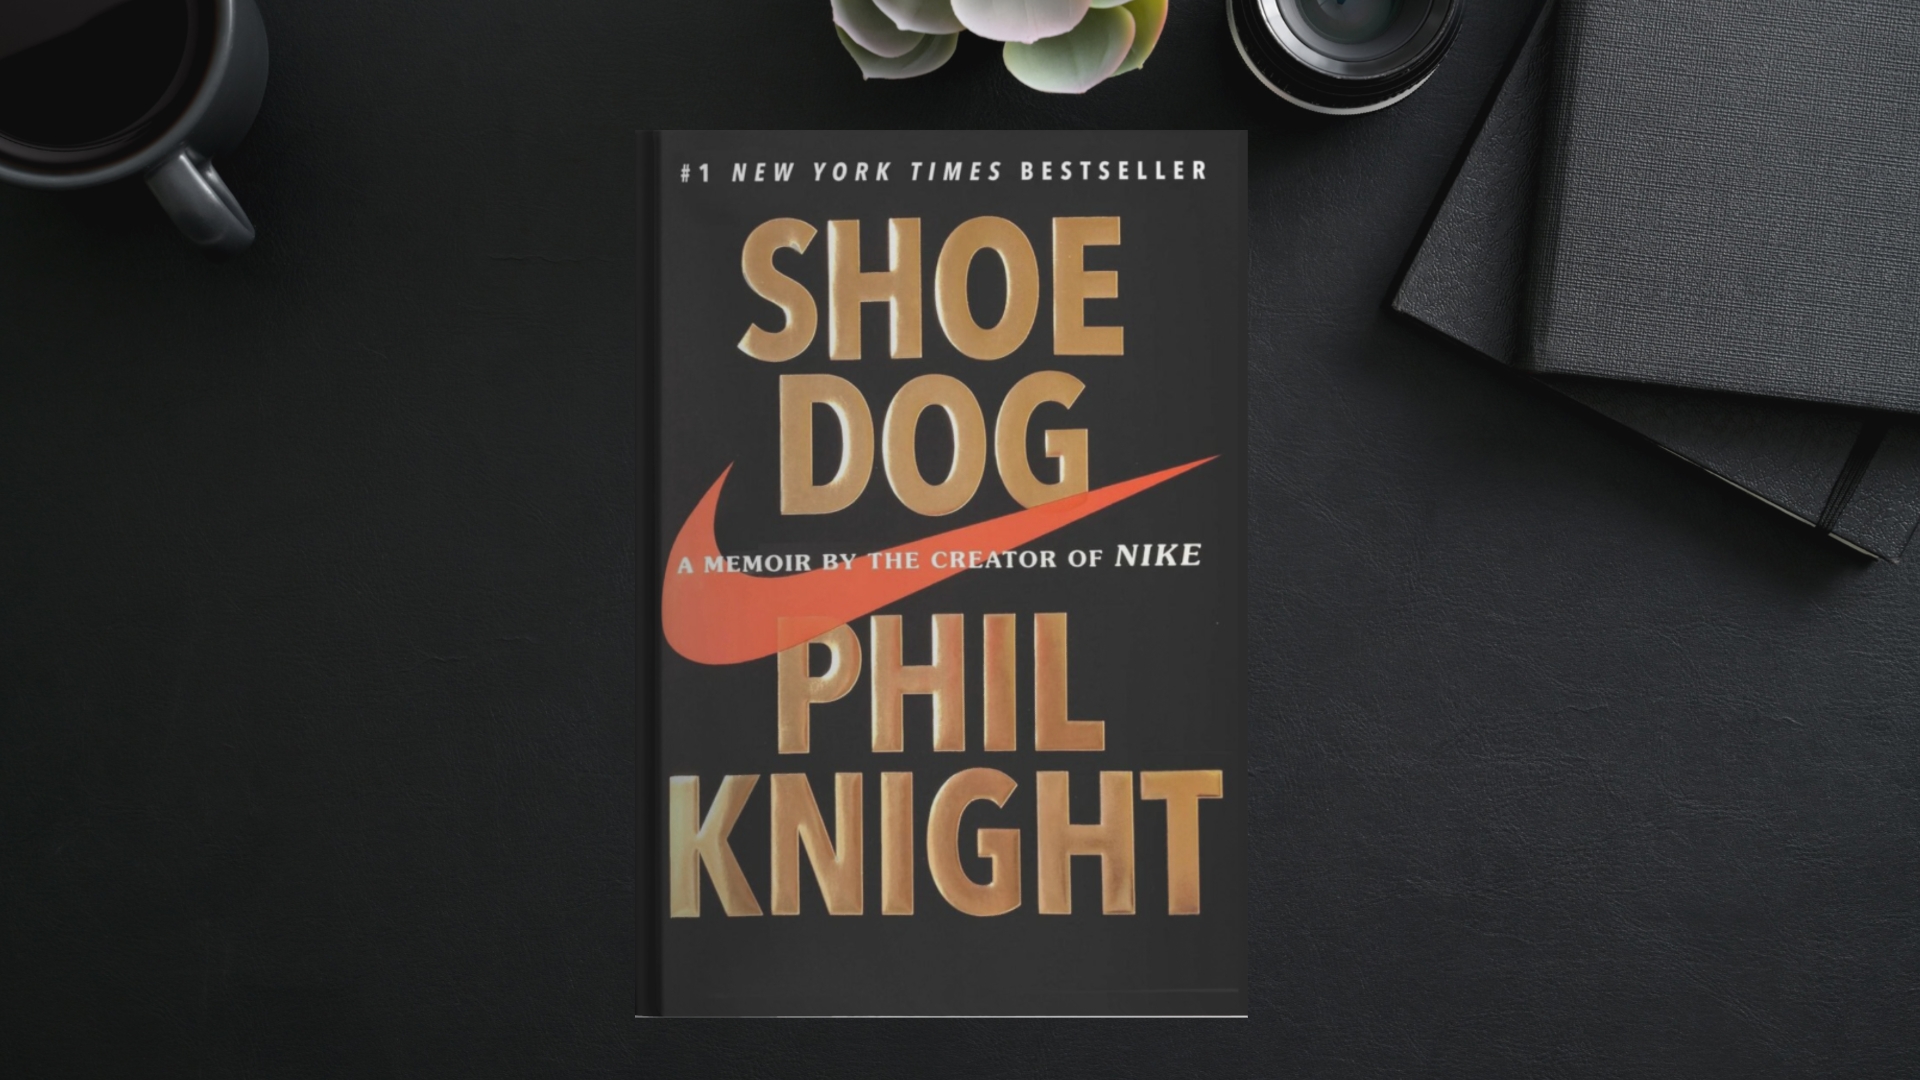 Shoe dog phil knight book